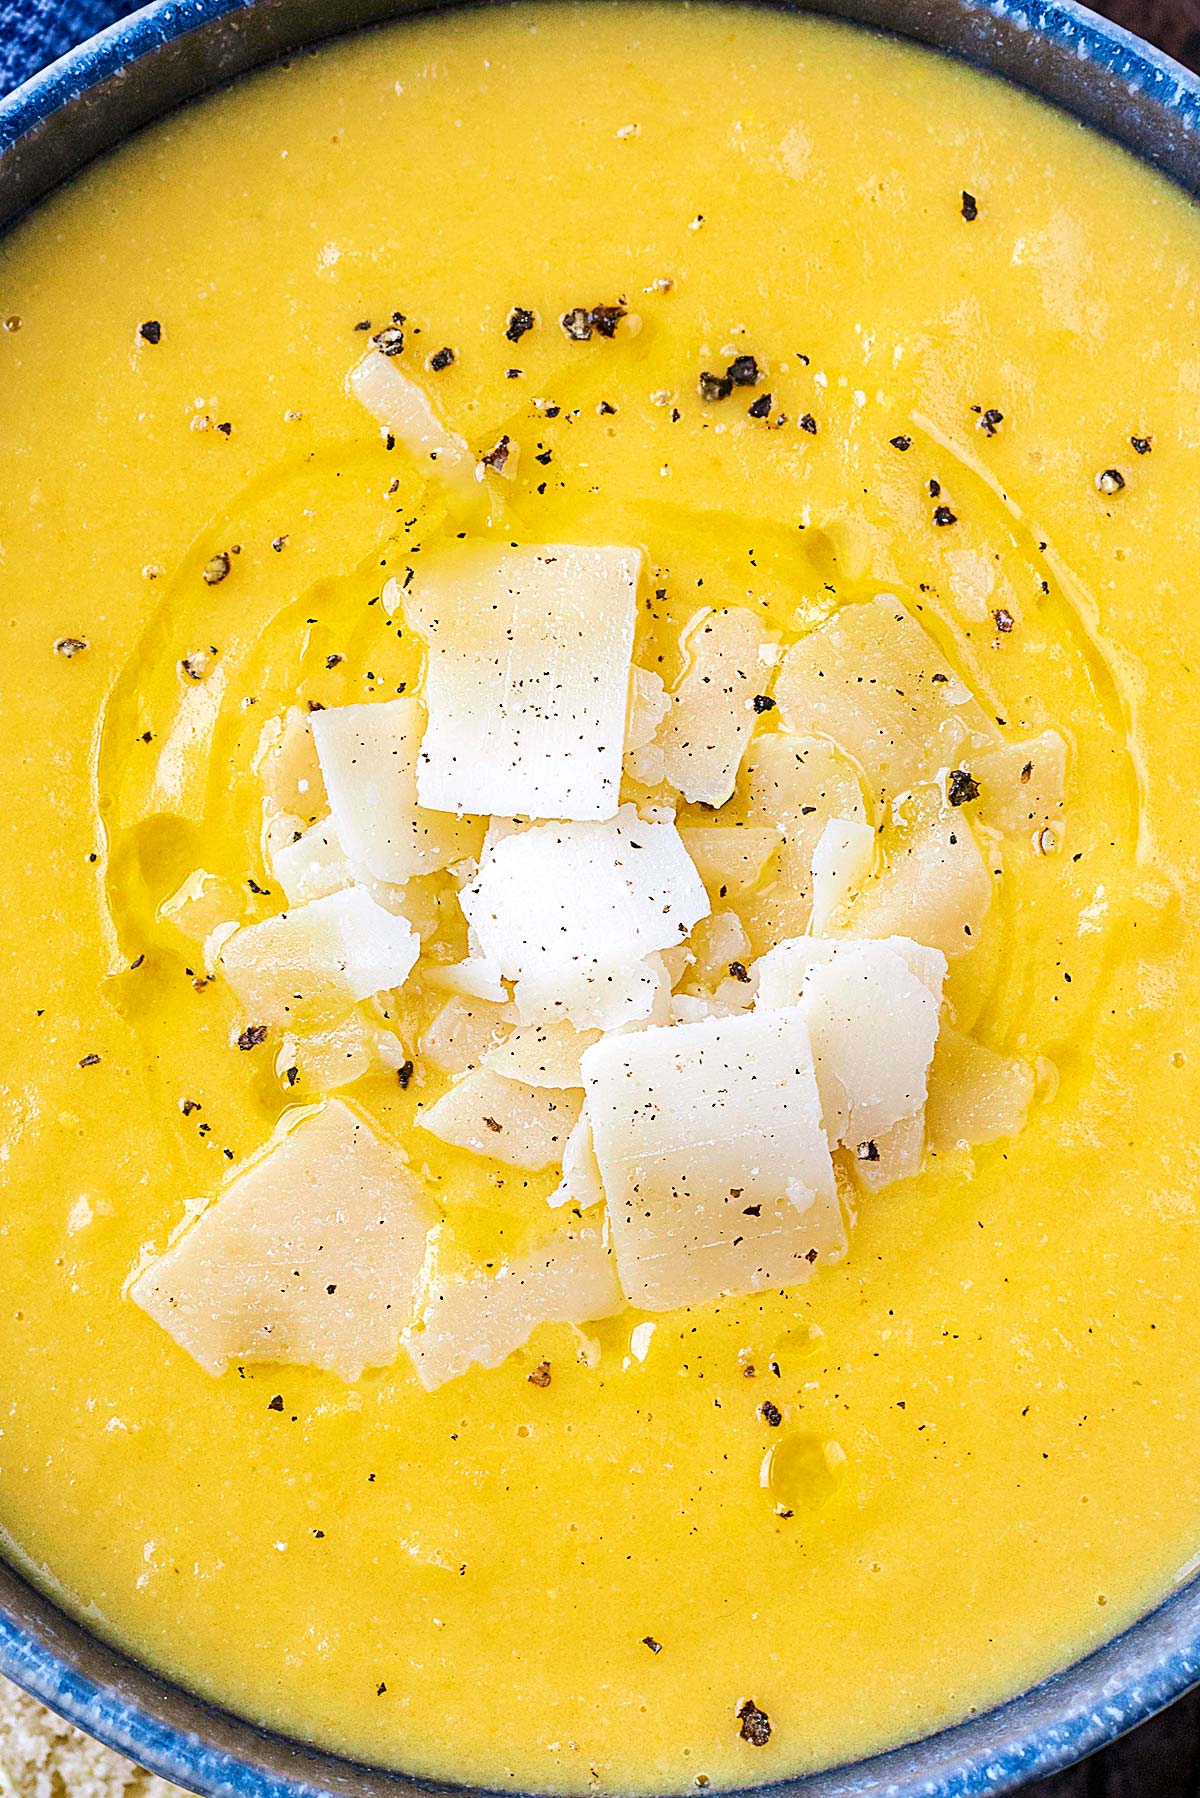 Parmesan shavings and cracked black pepper on the top of a bowl of soup.